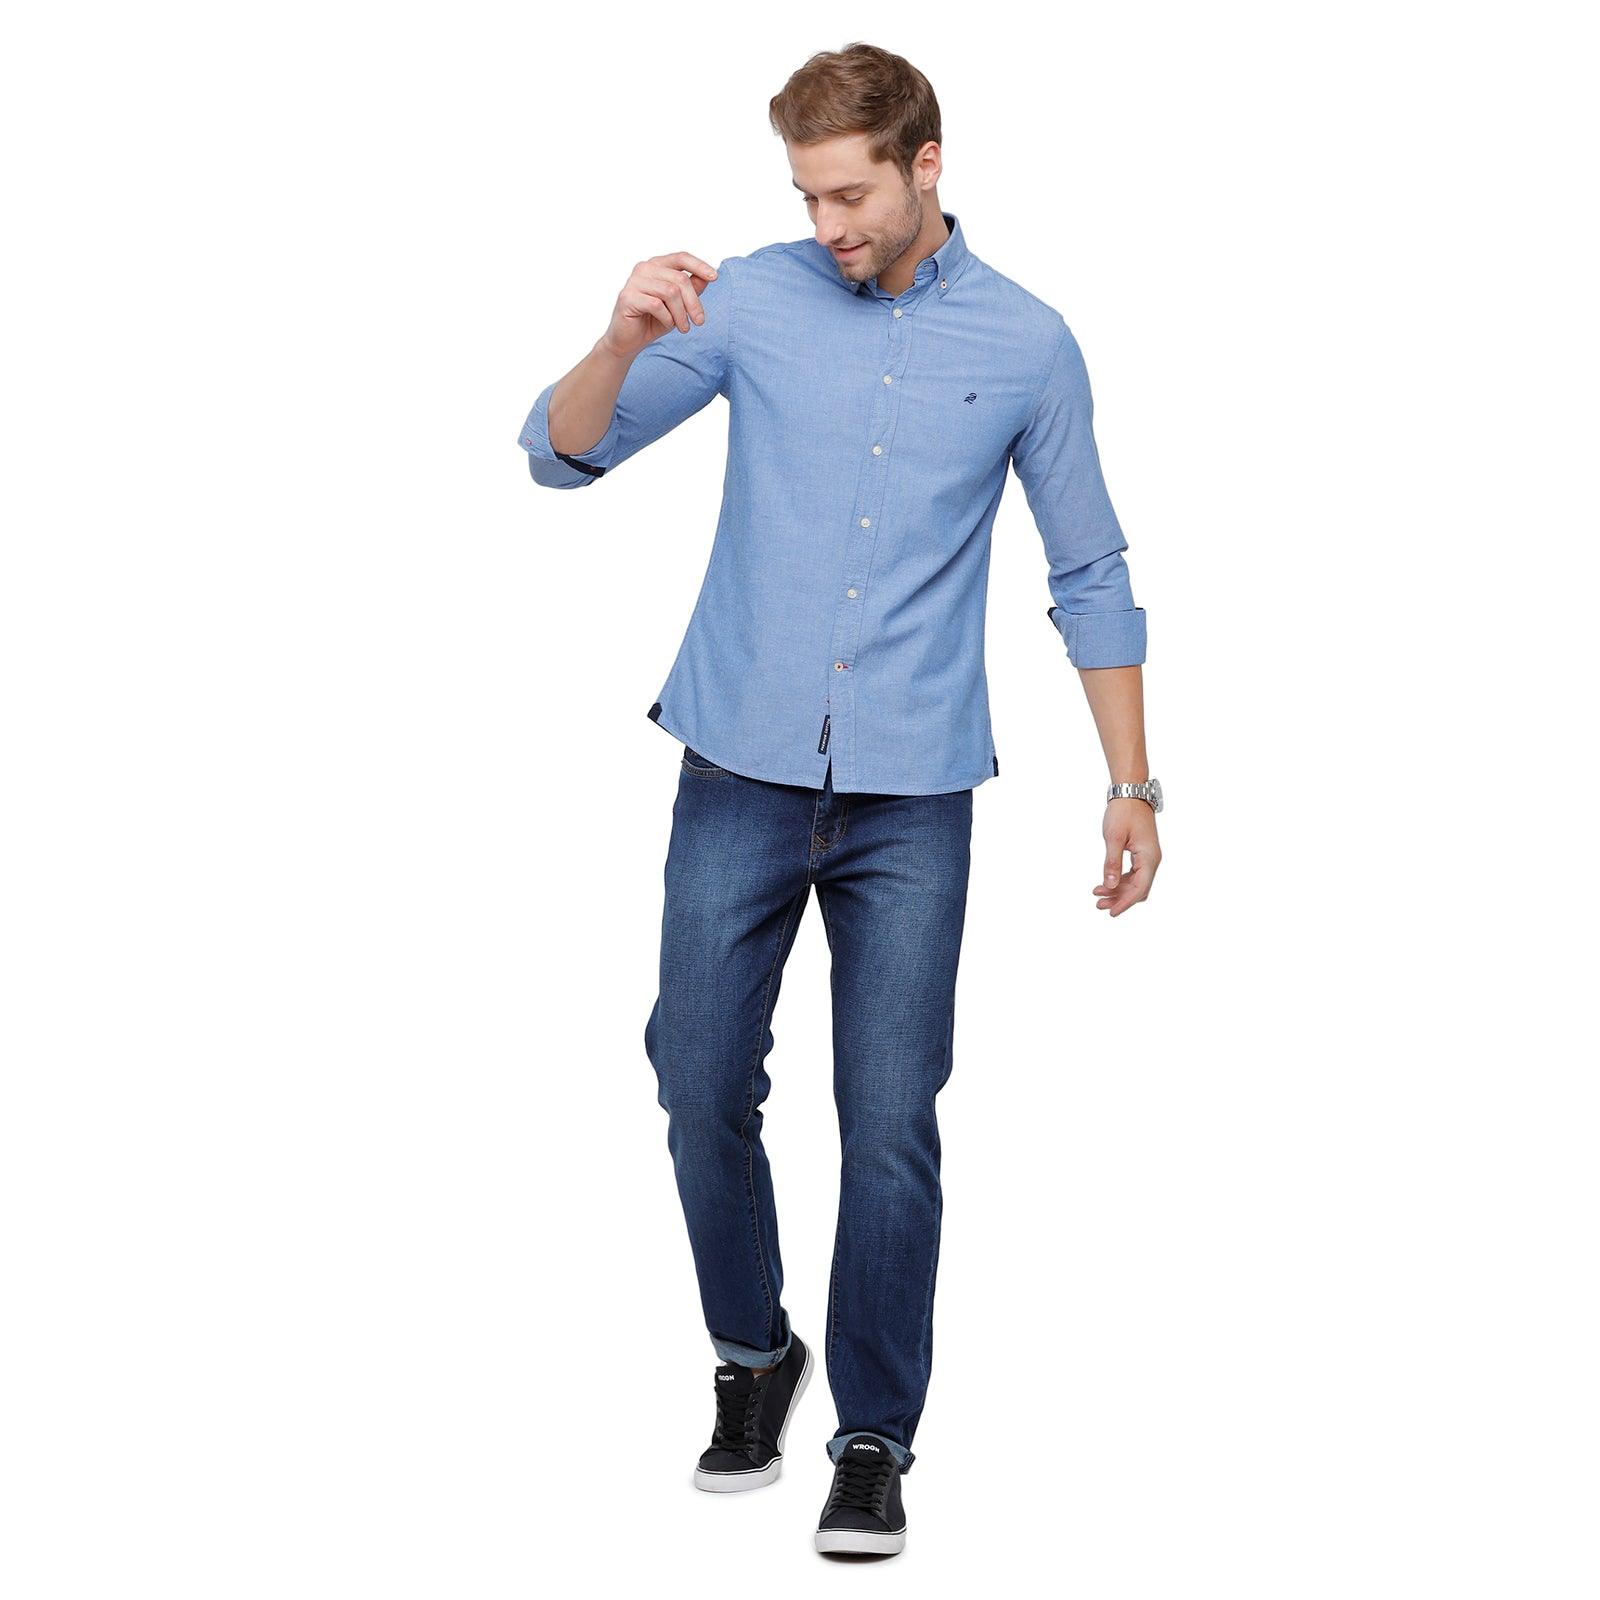 Double two Men Solid Blue Button down collar Long Sleeves 100% Cotton Slim Fit Casual shirt